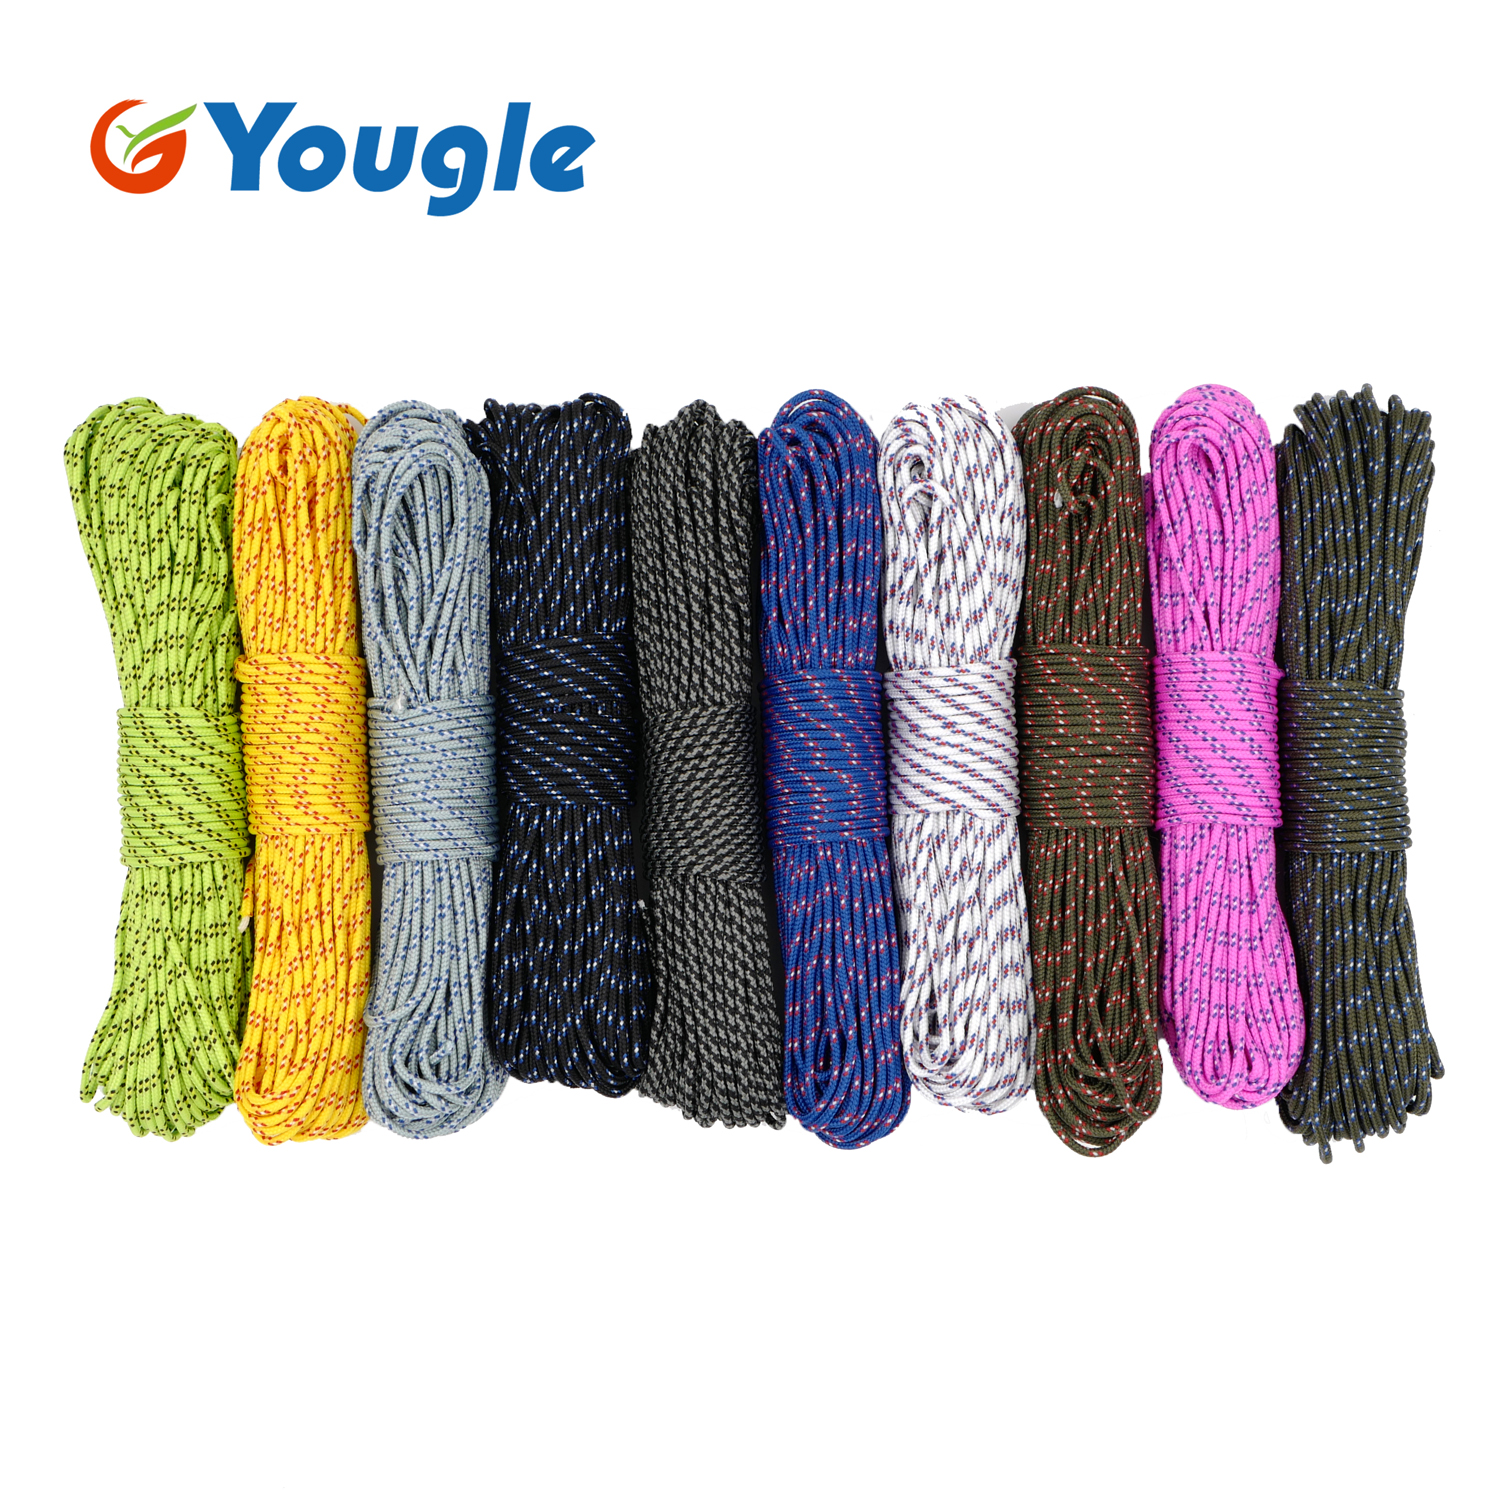 CAMPINGSKY Paracord 550 Parachute Cord Lanyard Tent Rope Guyline Mil Spec  Type III 7 Strand 100FT For Hiking Camping 10 Colors